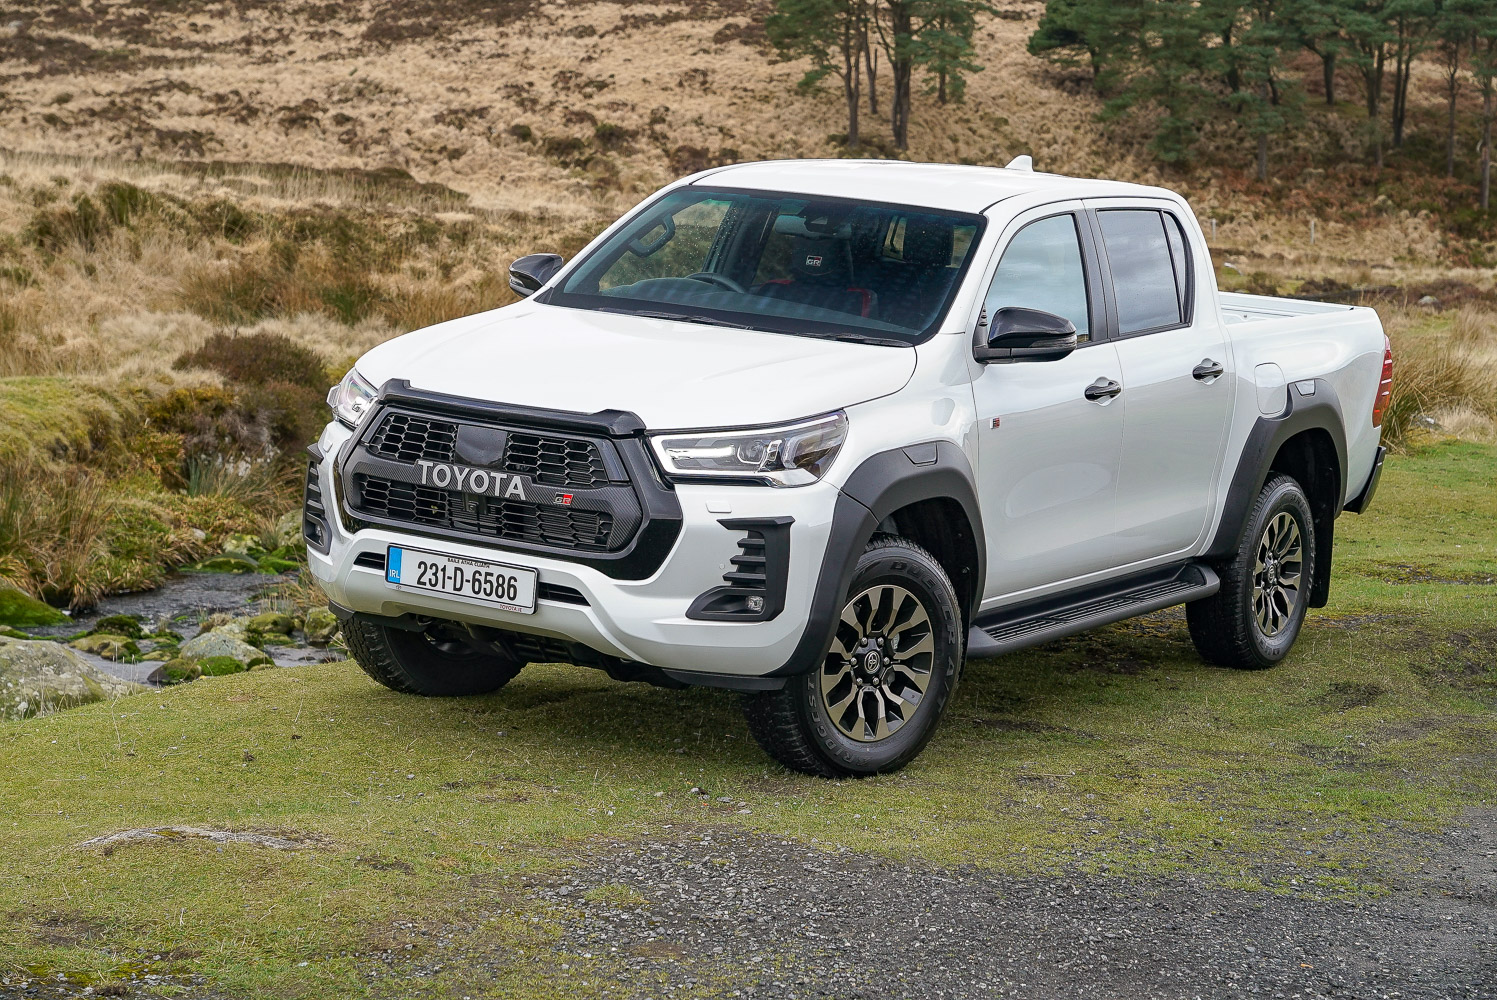 Toyota HiLux Review, For Sale, Colours, Models, Specs & Interior